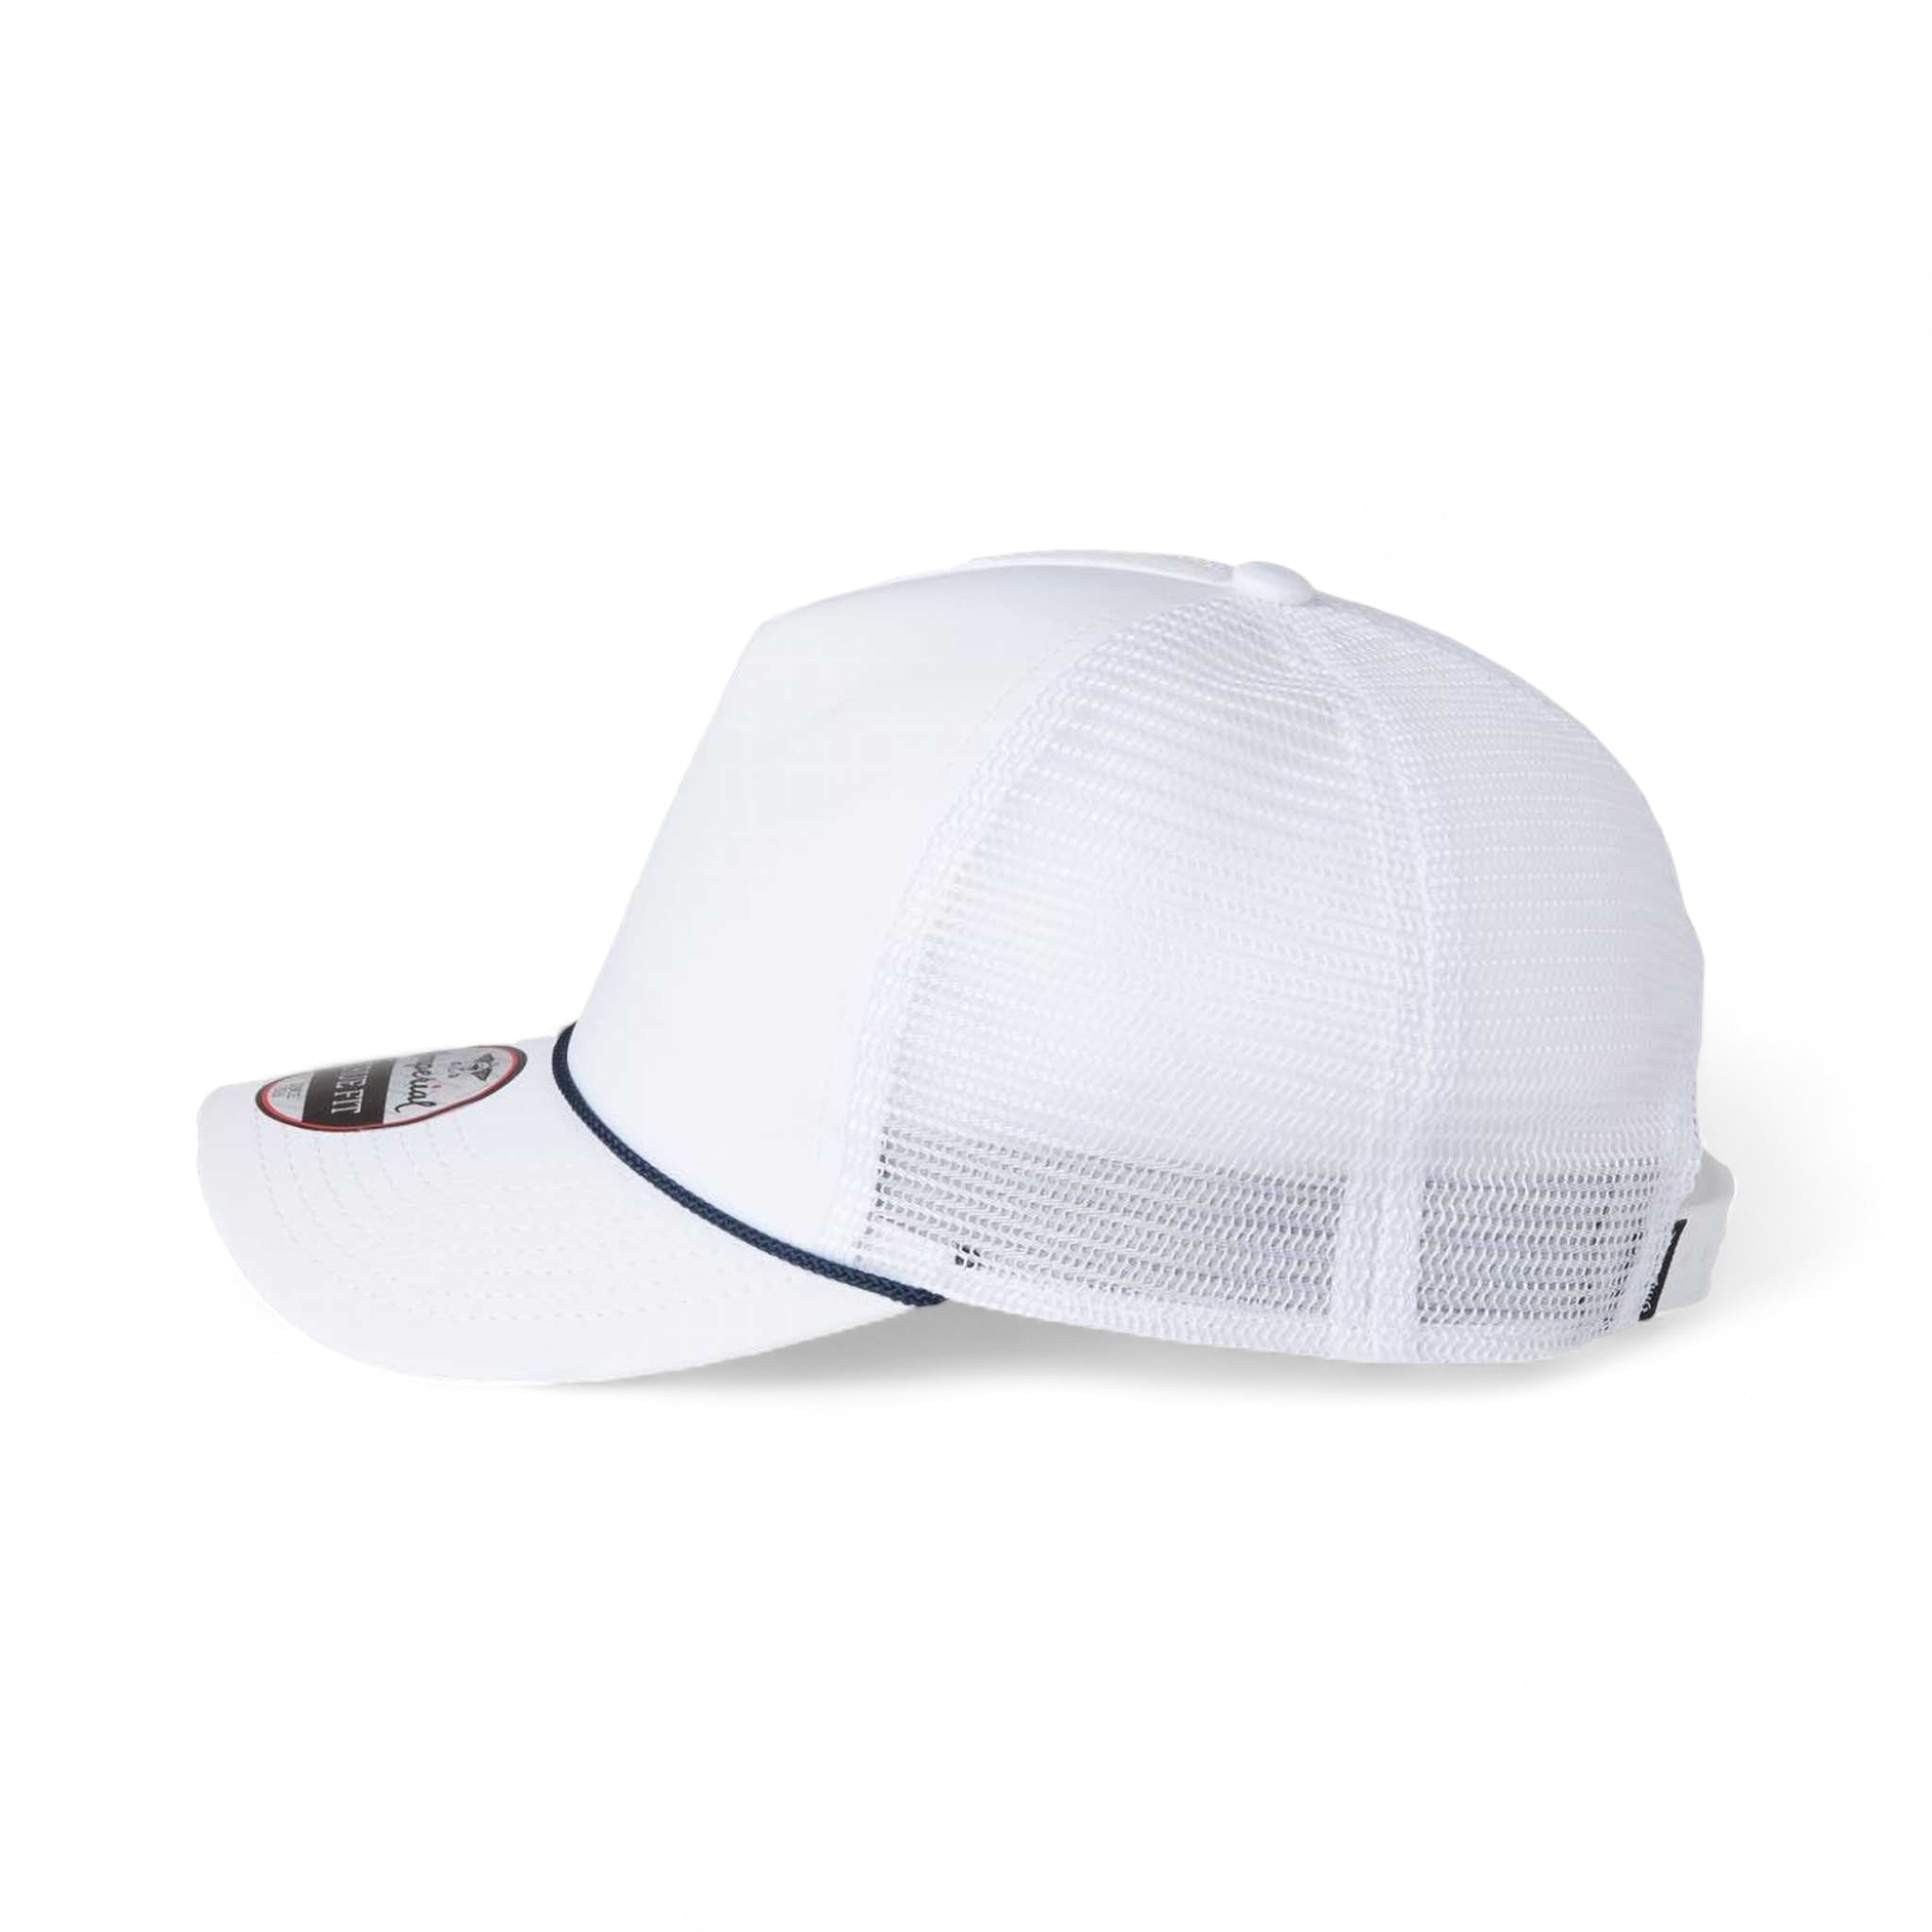 Side view of Imperial 5055 custom hat in white, white and navy